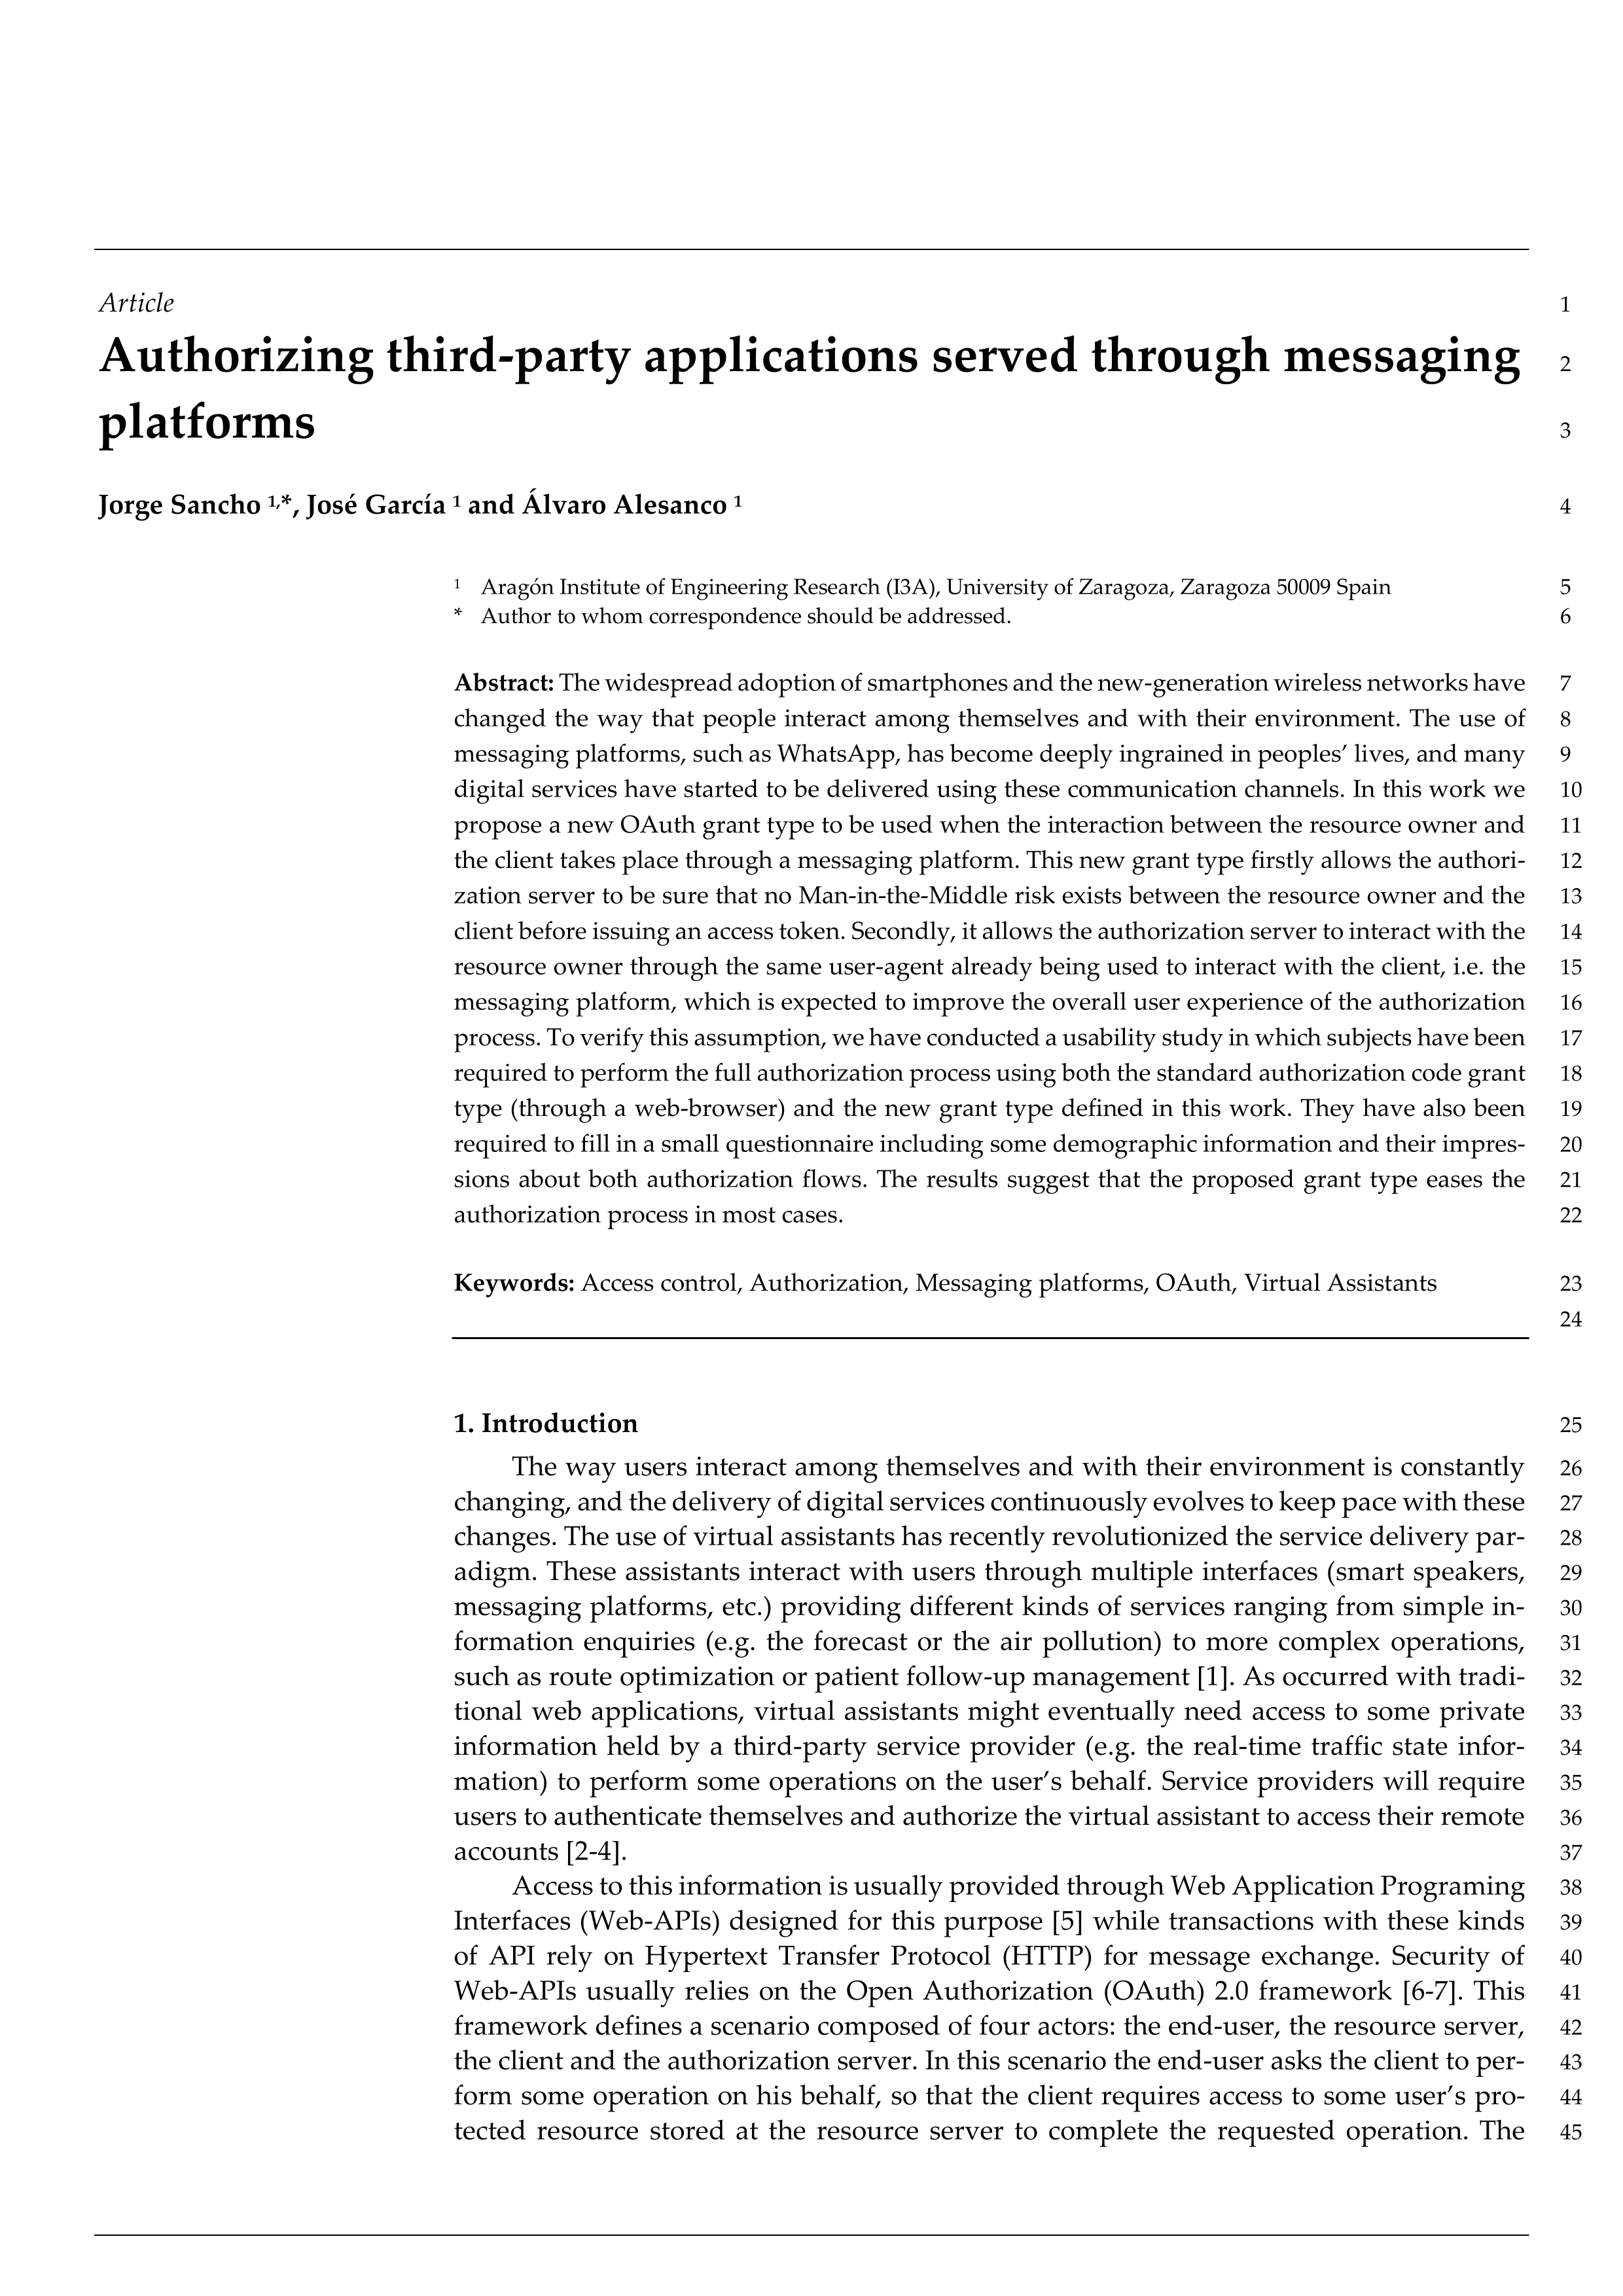 Authorizing Third-Party Applications Served through Messaging Platforms